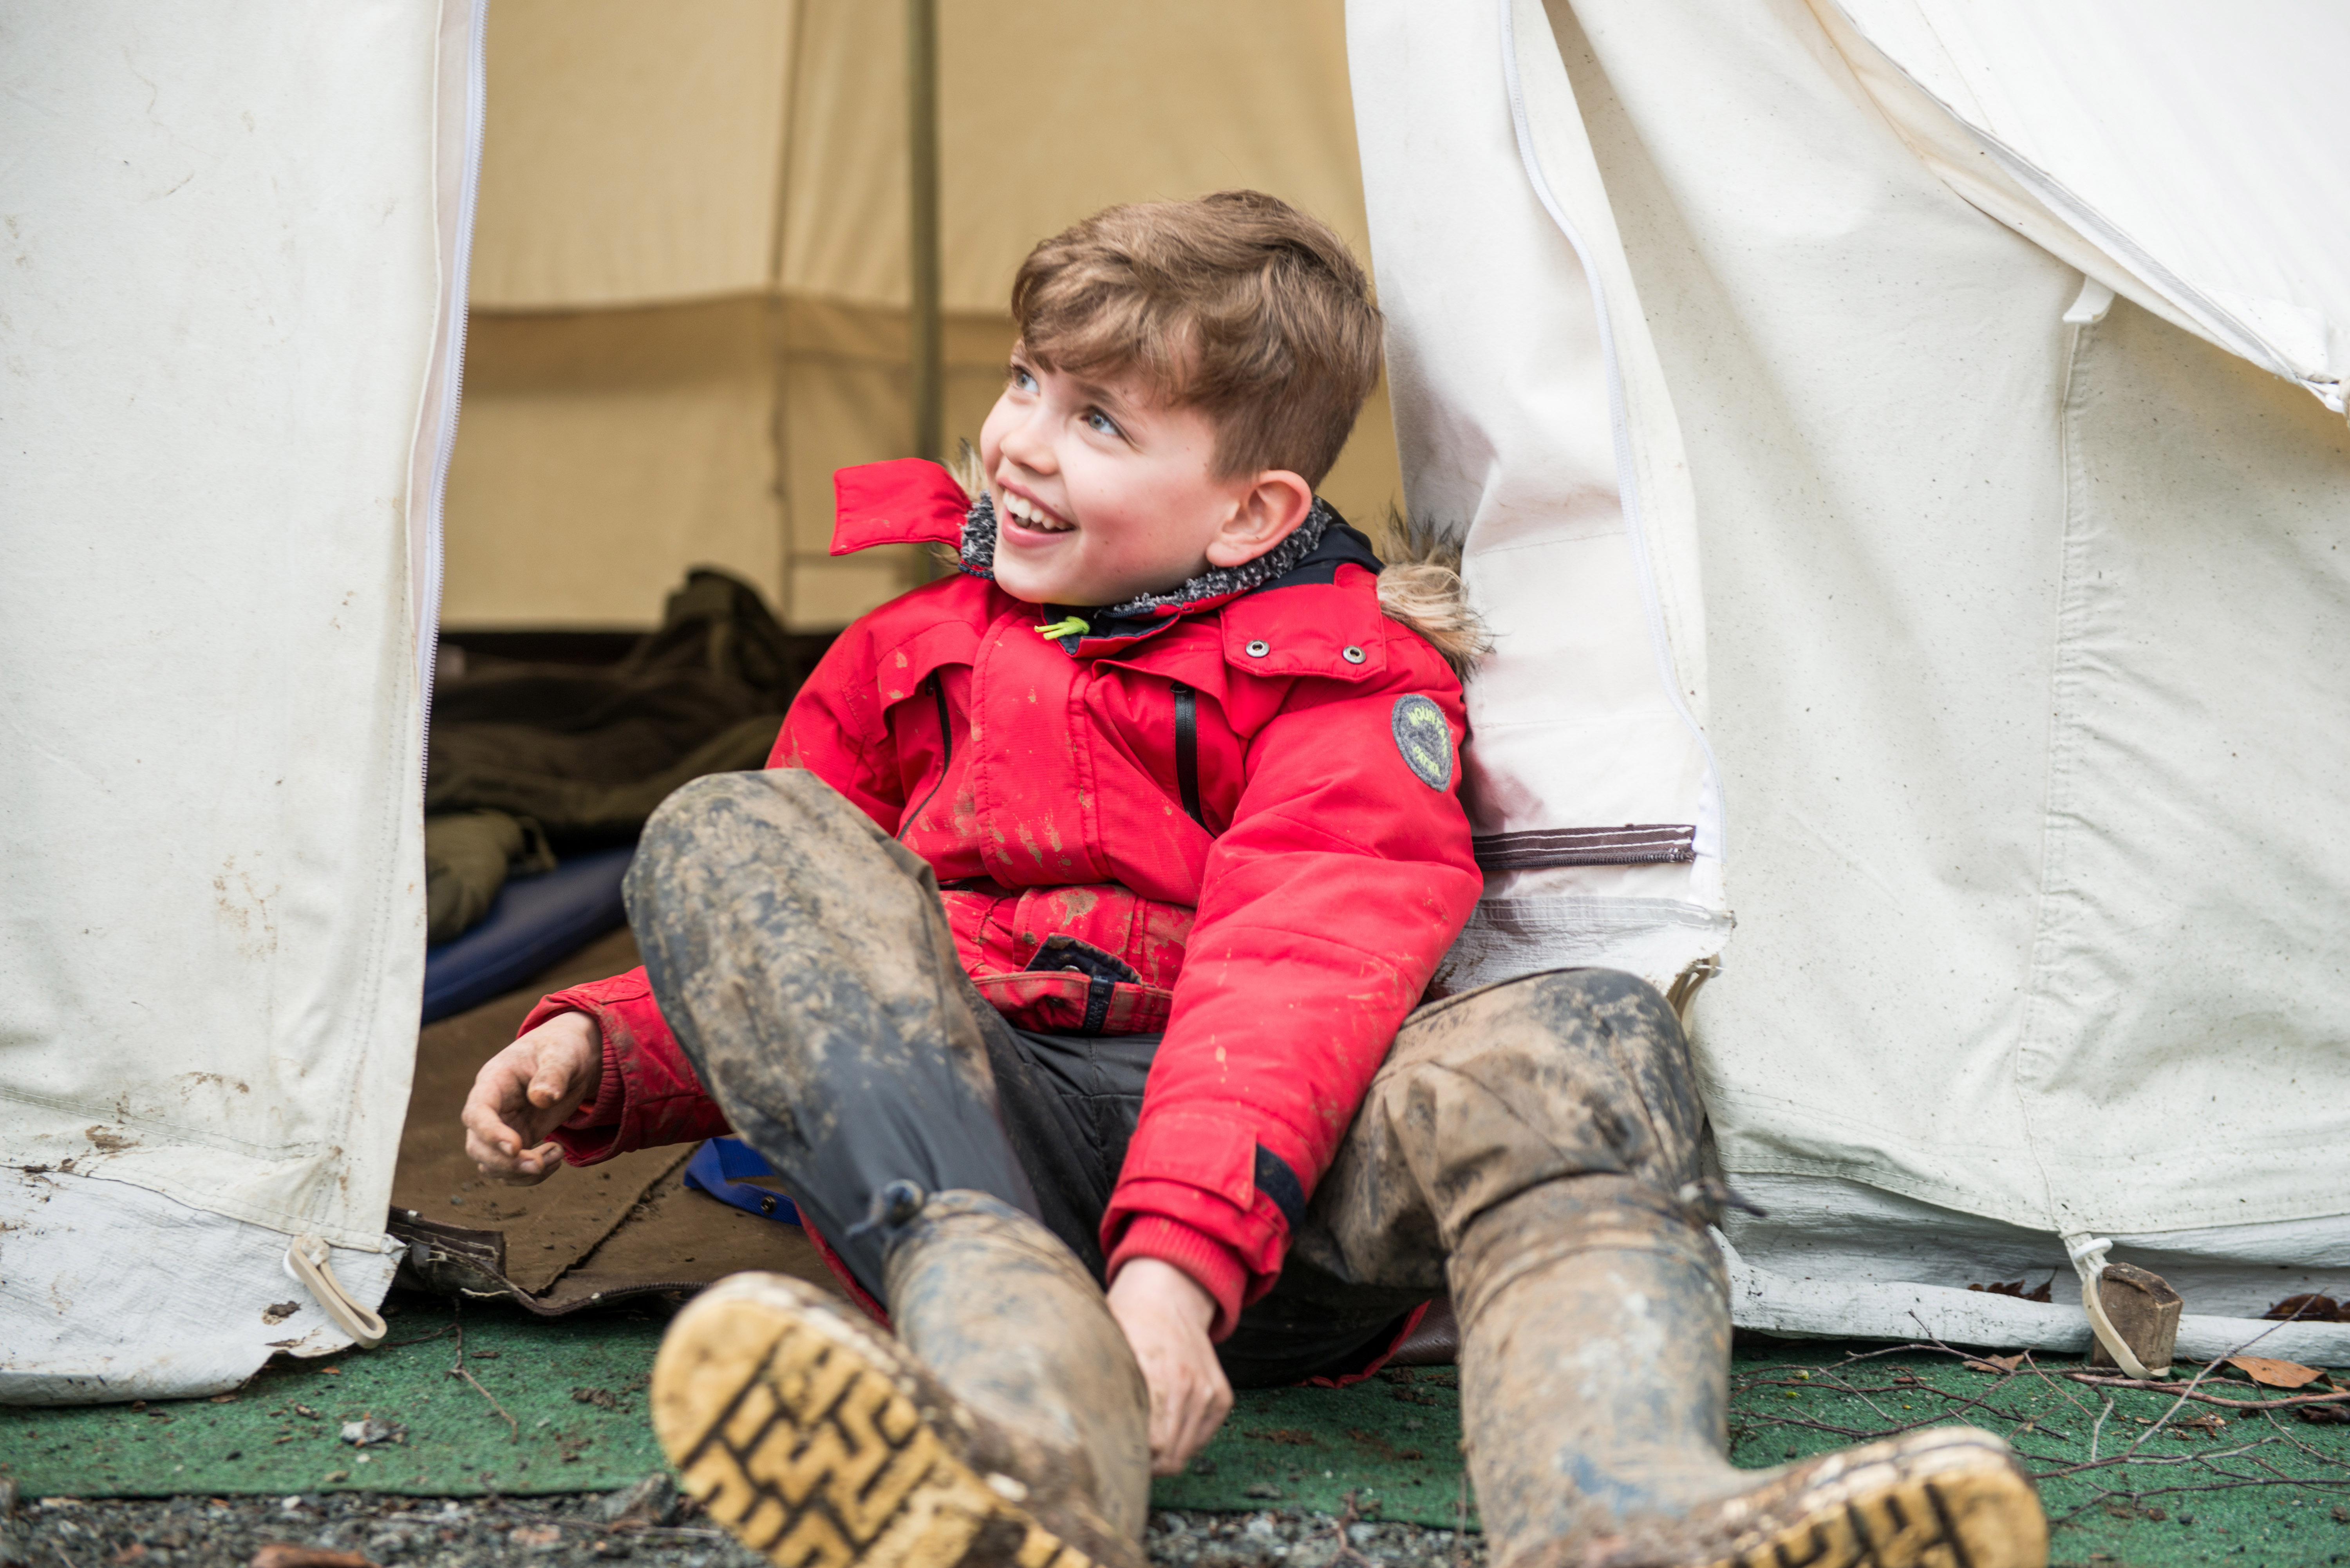 Boy puts on boots outside tent